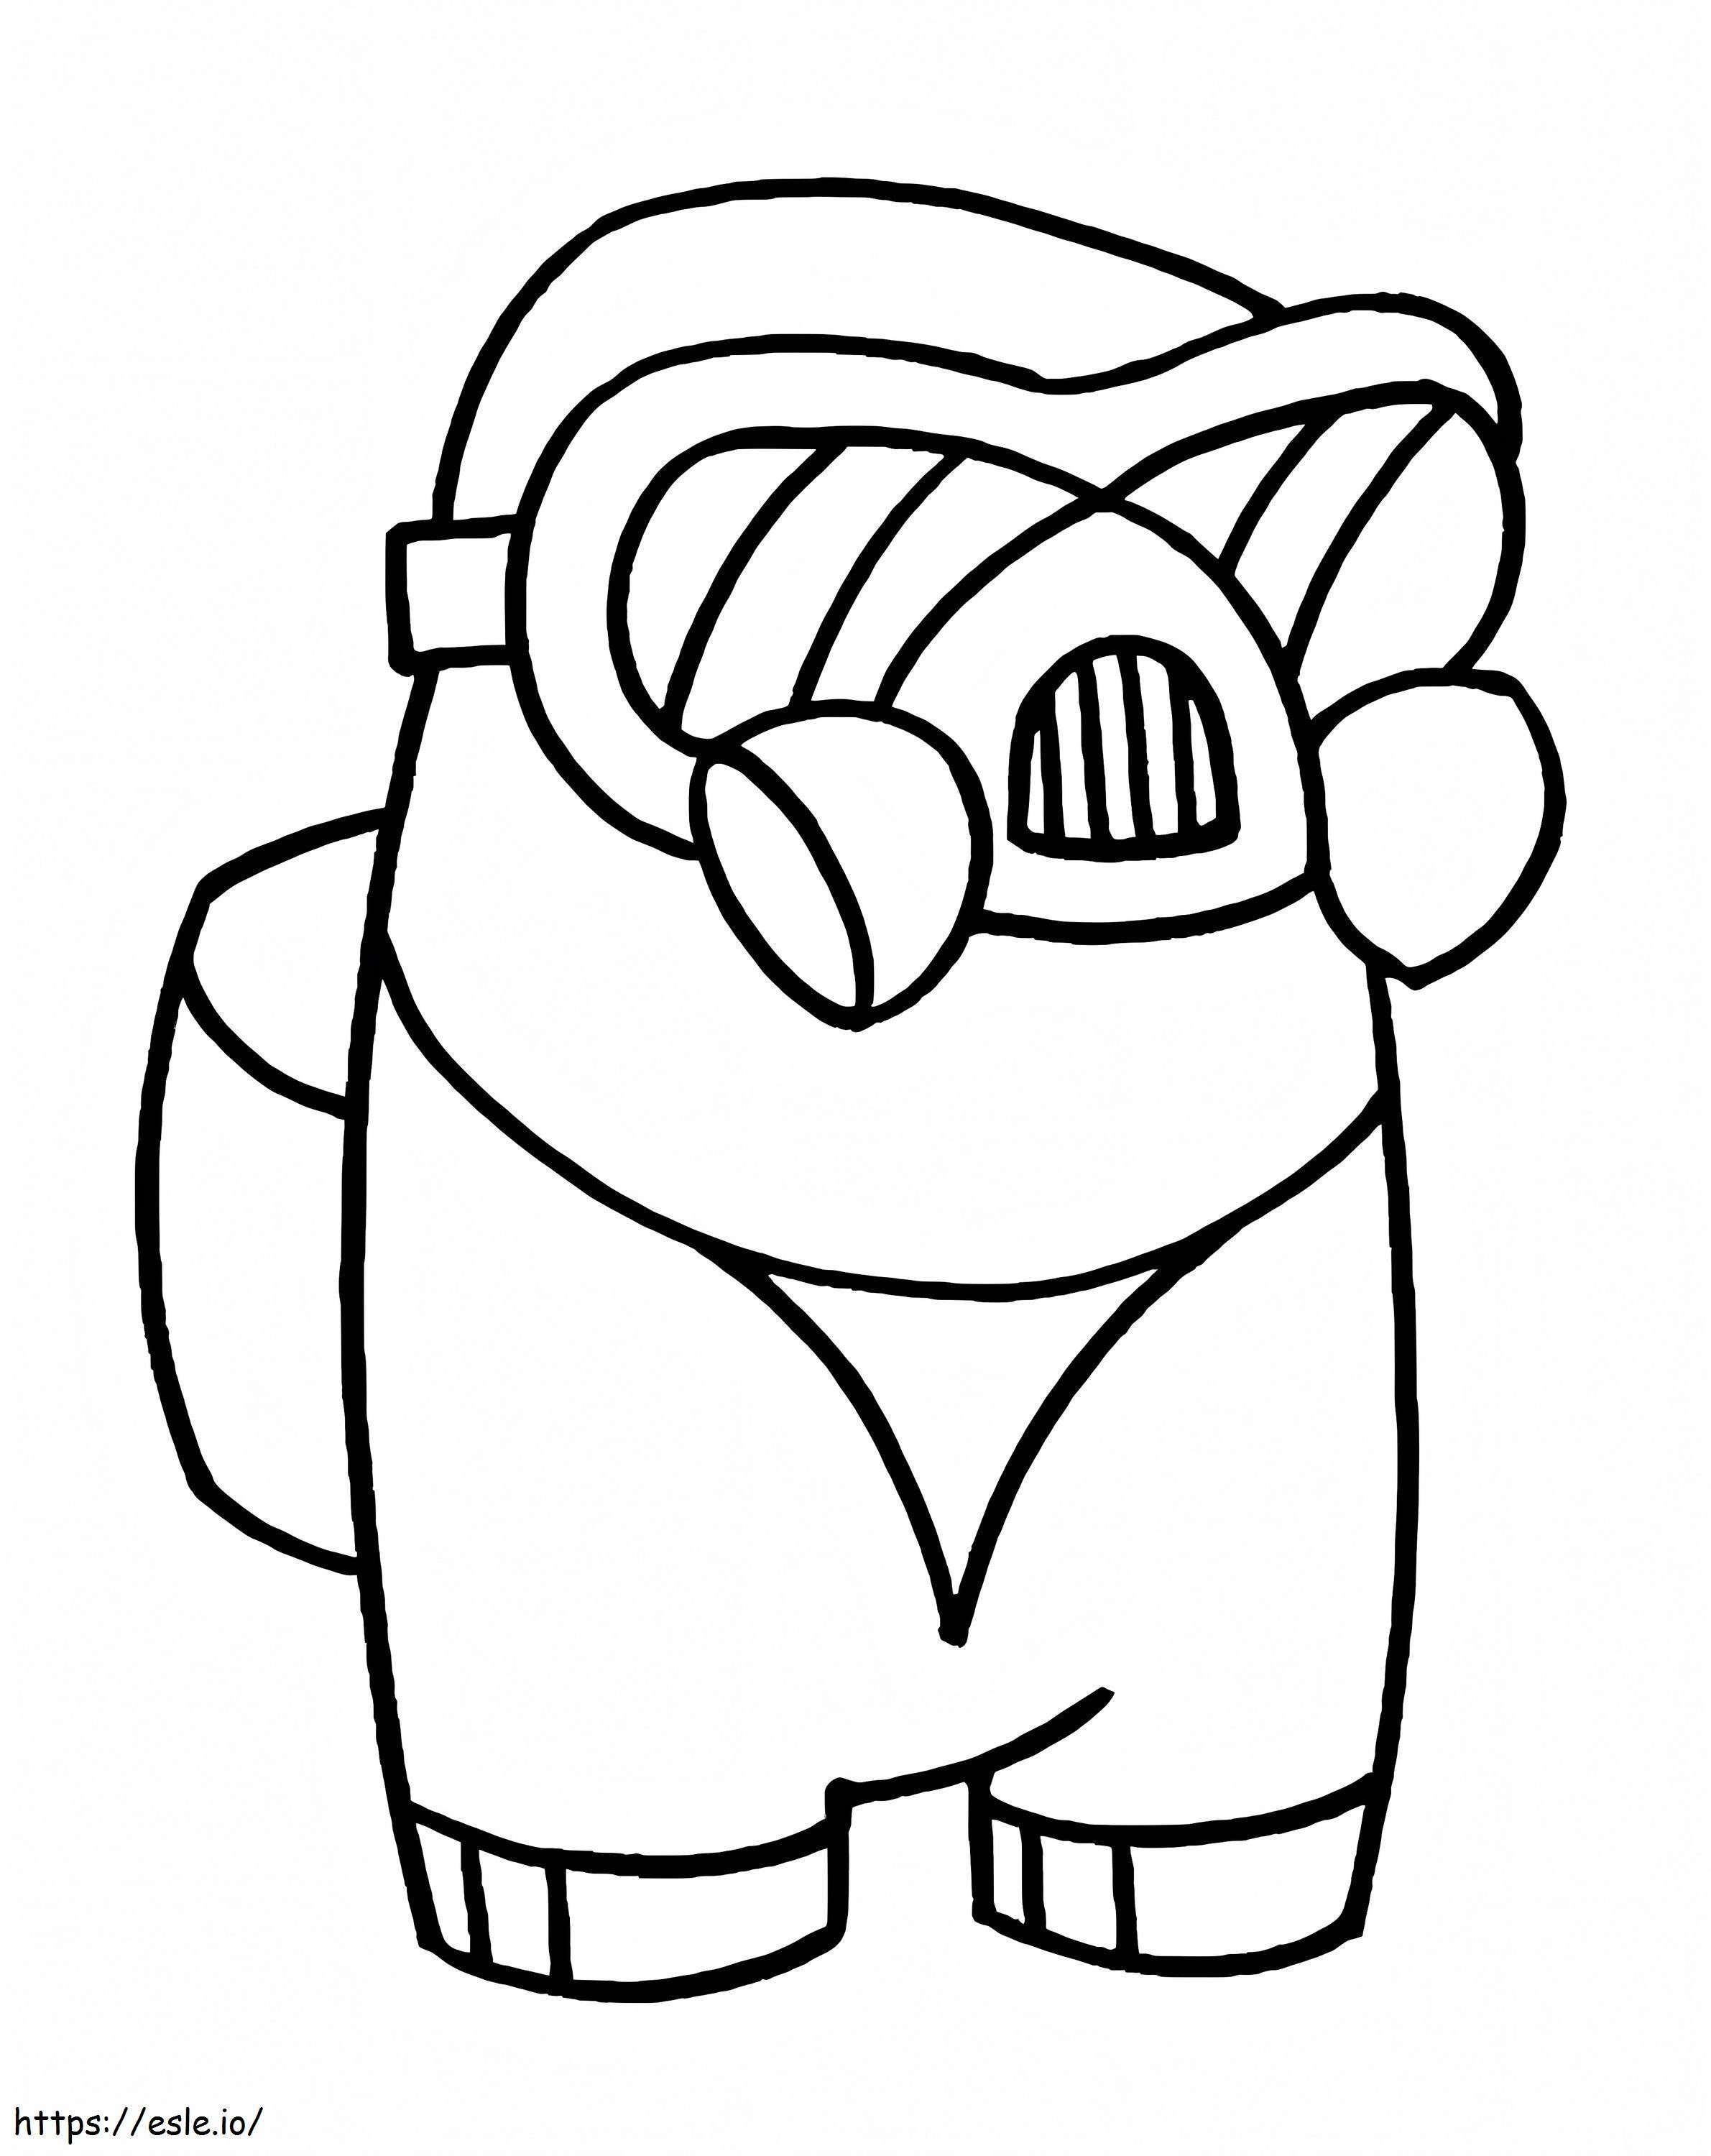 Astronaut With Gas Mask coloring page